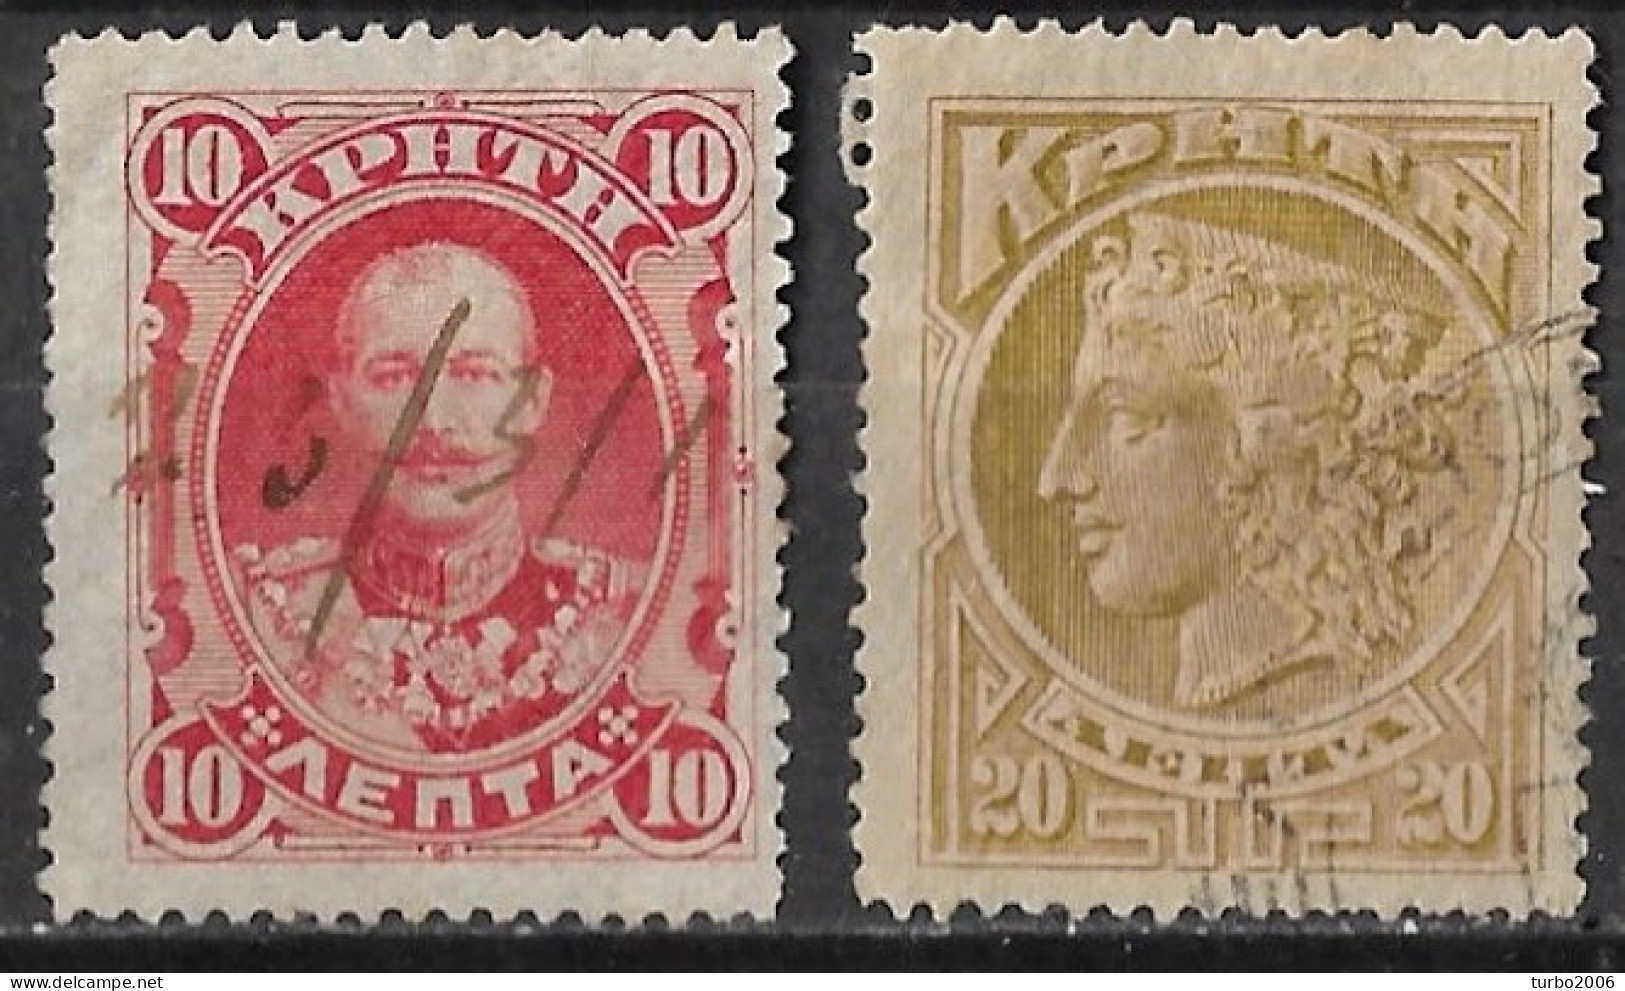 CRETE Fiscally Used 1900 1st Issue Of The Cretan State 10 L. Red Vl. 3 + Fiscal 20 L Yellow Olive (Feenstra 36) - Crète